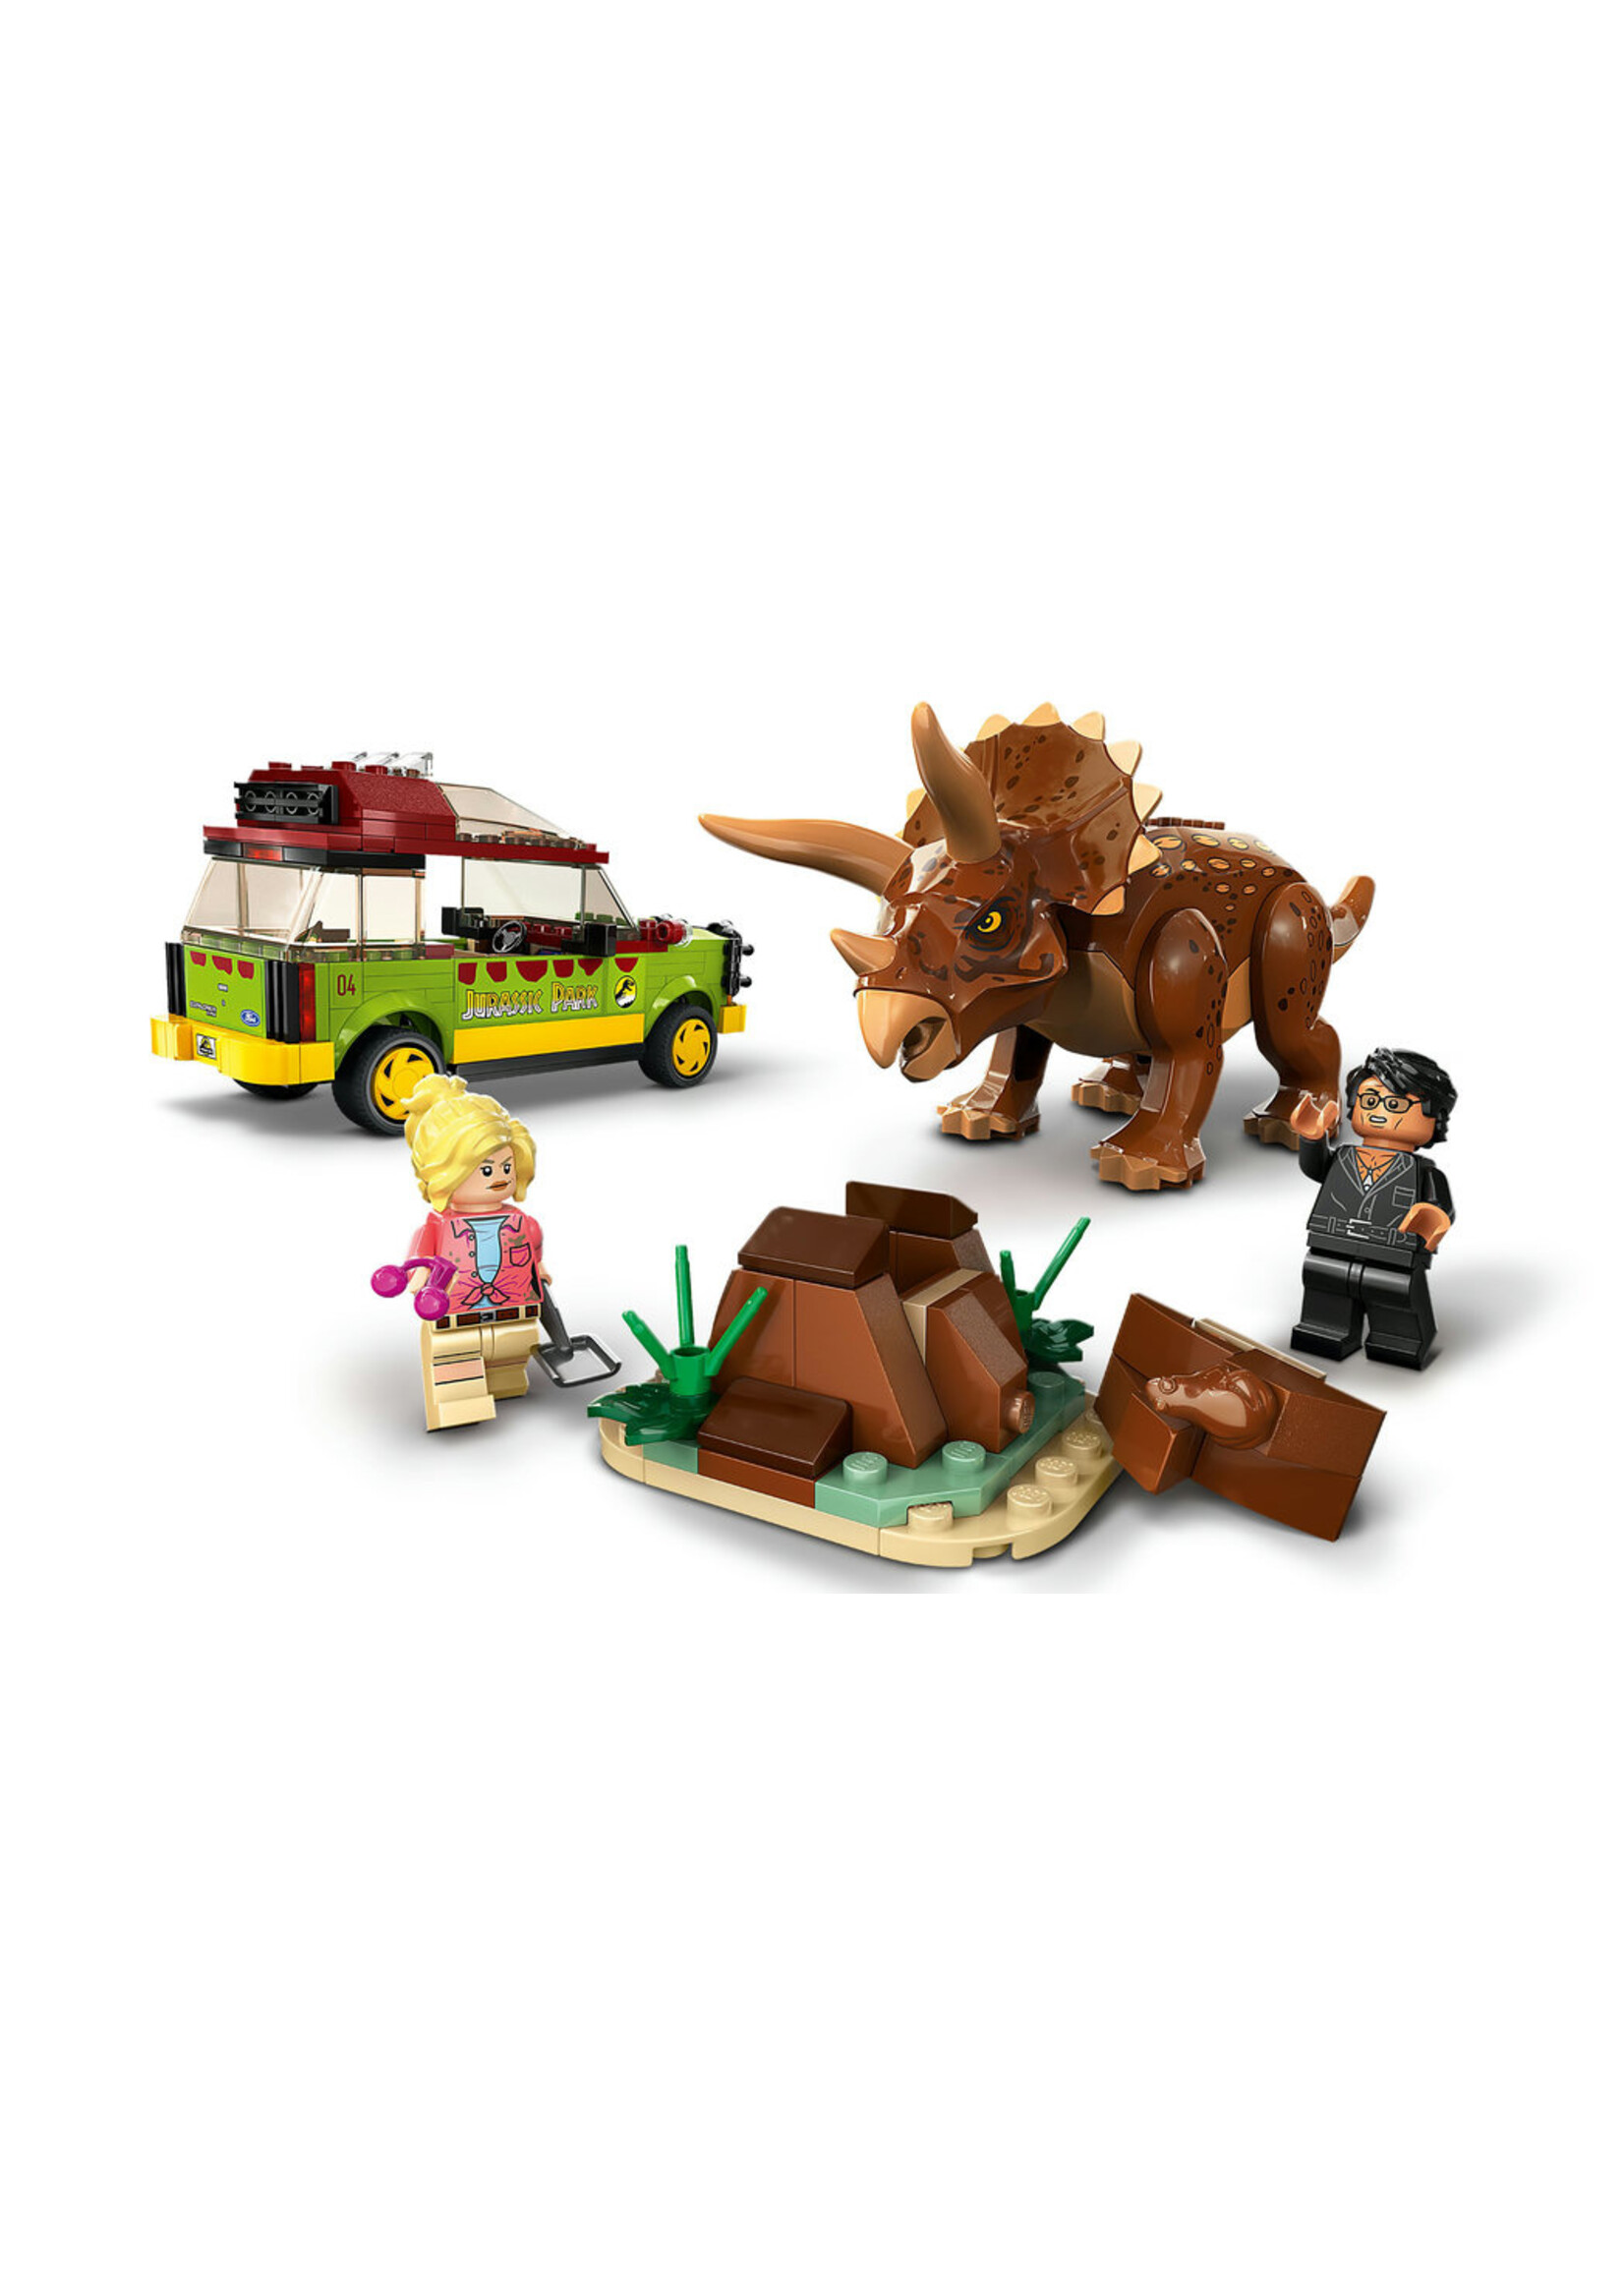 LEGO Jurassic Park Triceratops Research Car Toy 76959